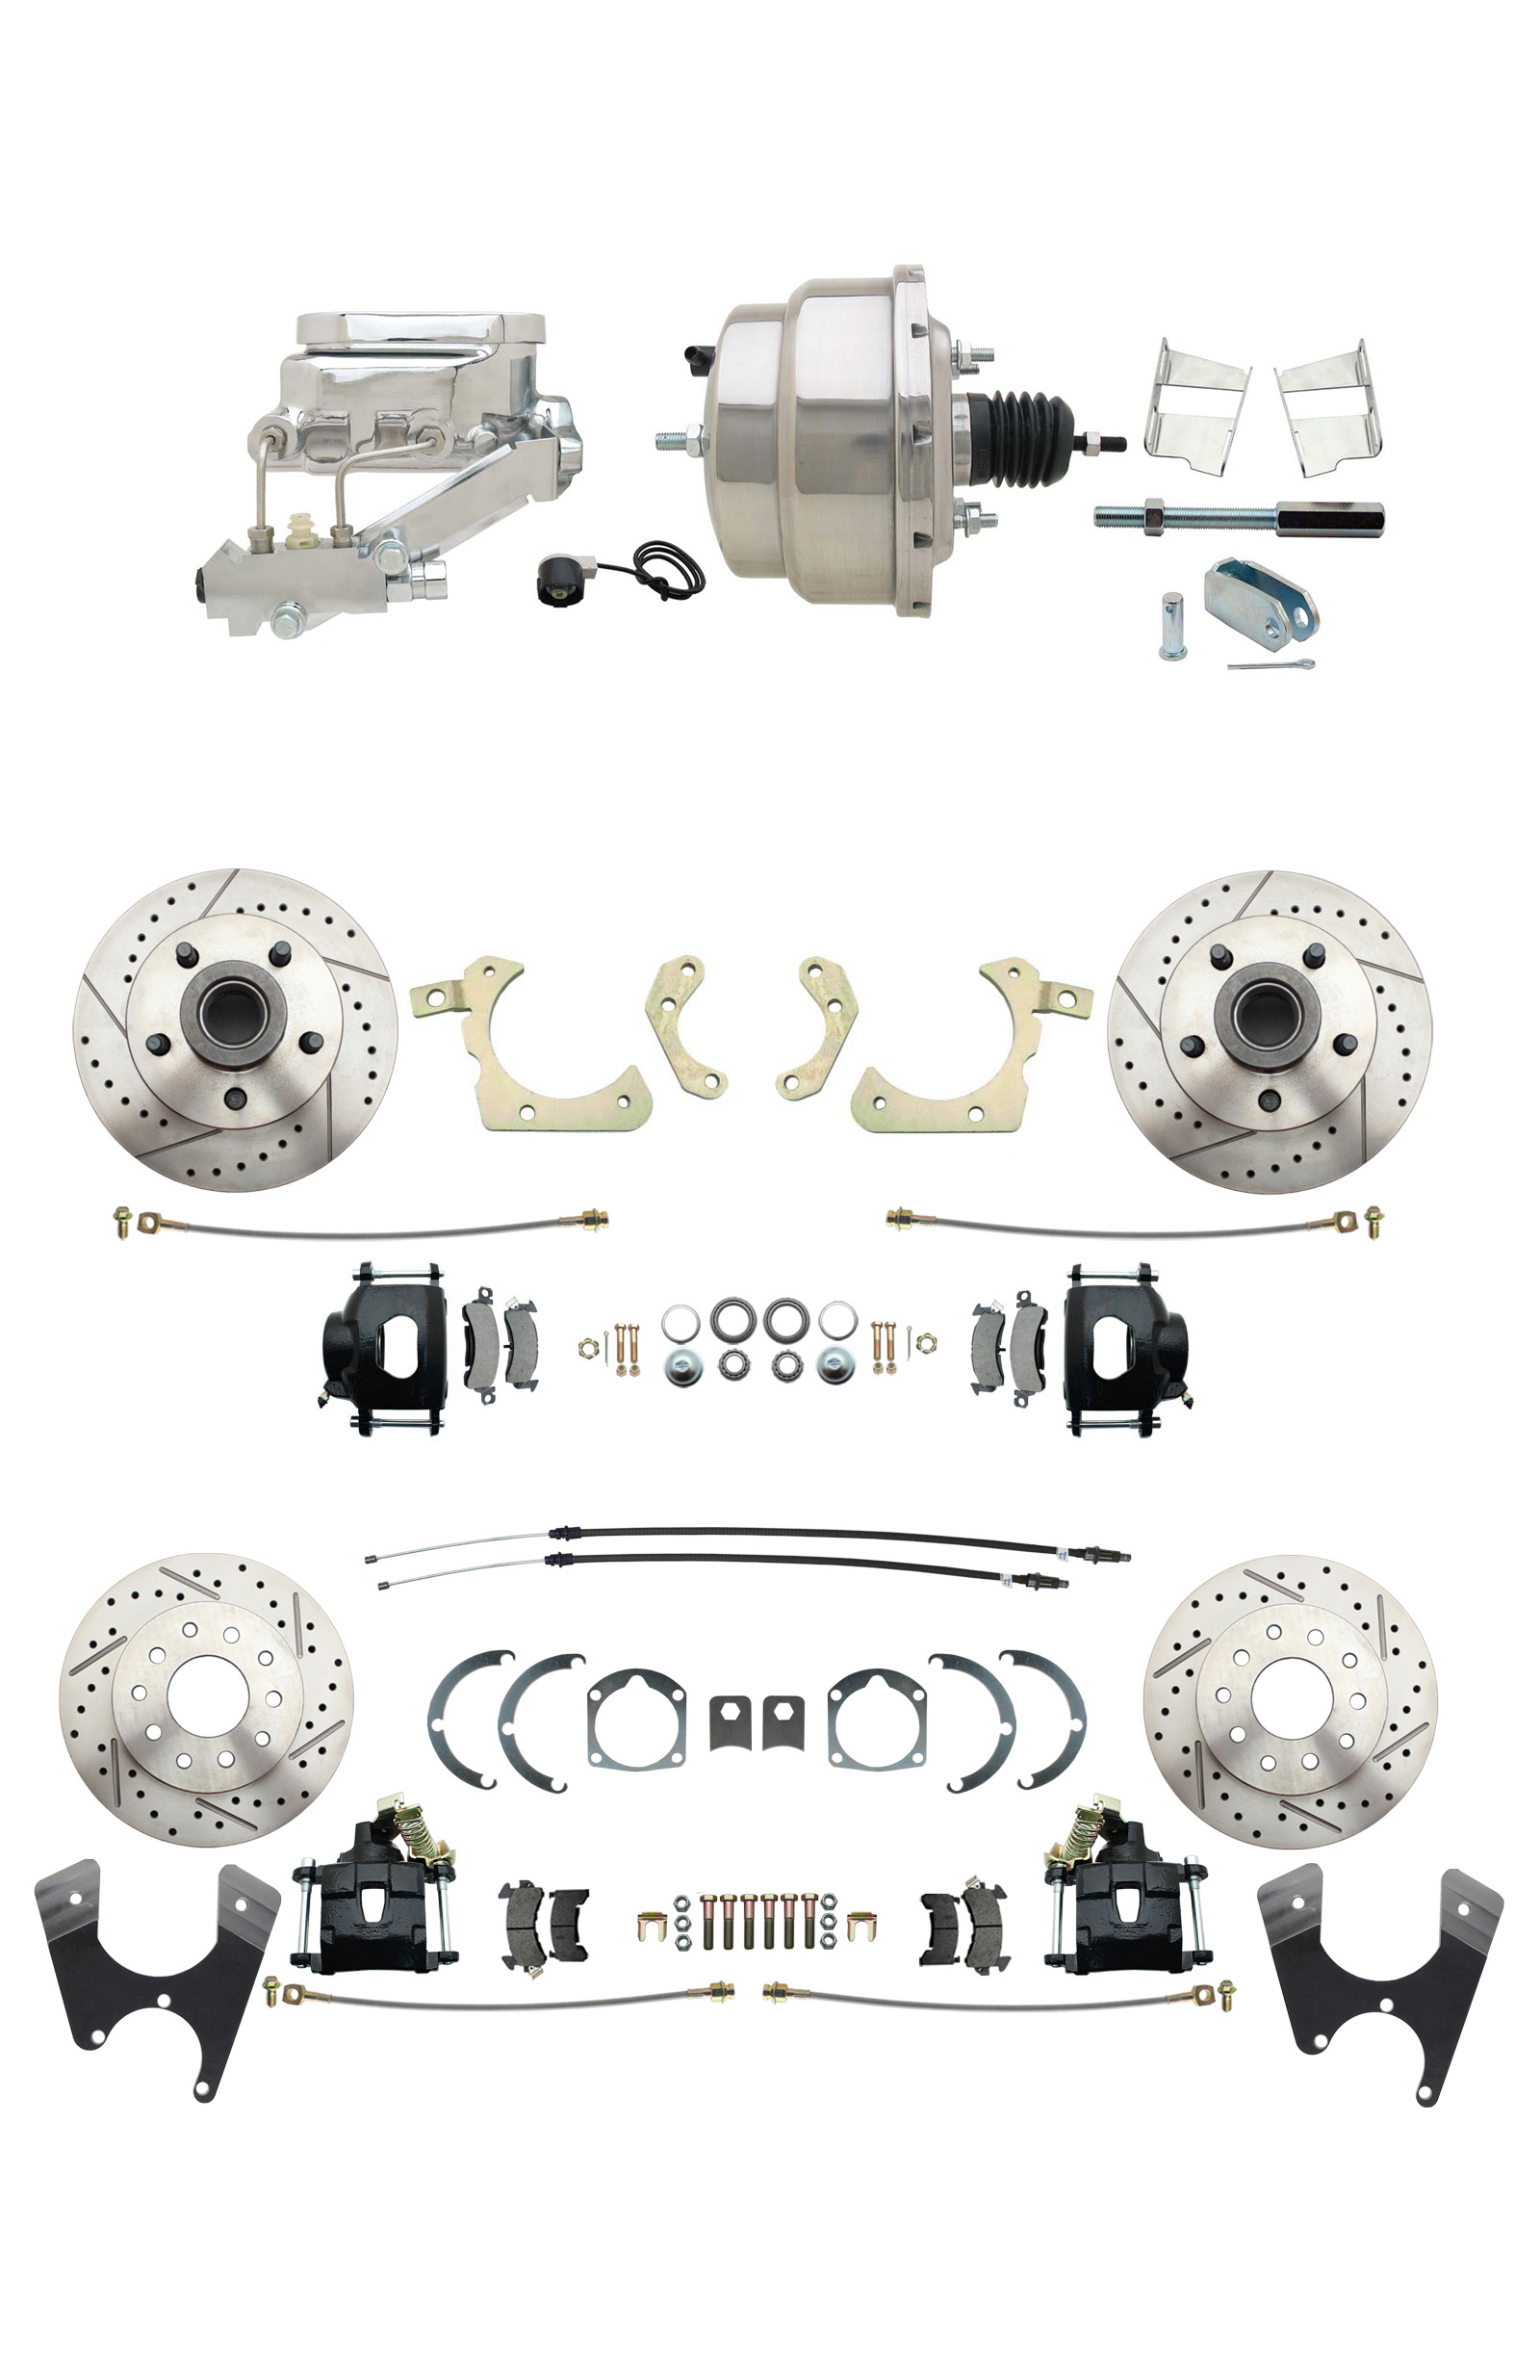 1959-1964 GM Full Size Front & Rear Power Disc Brake Kit Black Powder Coated Calipers Drilled/Slotted Rotors (Impala, Bel Air, Biscayne) & 8 Dual Stainless Steel Booster Conversion Kit W/ Chrome Flat Top Master Cylinder